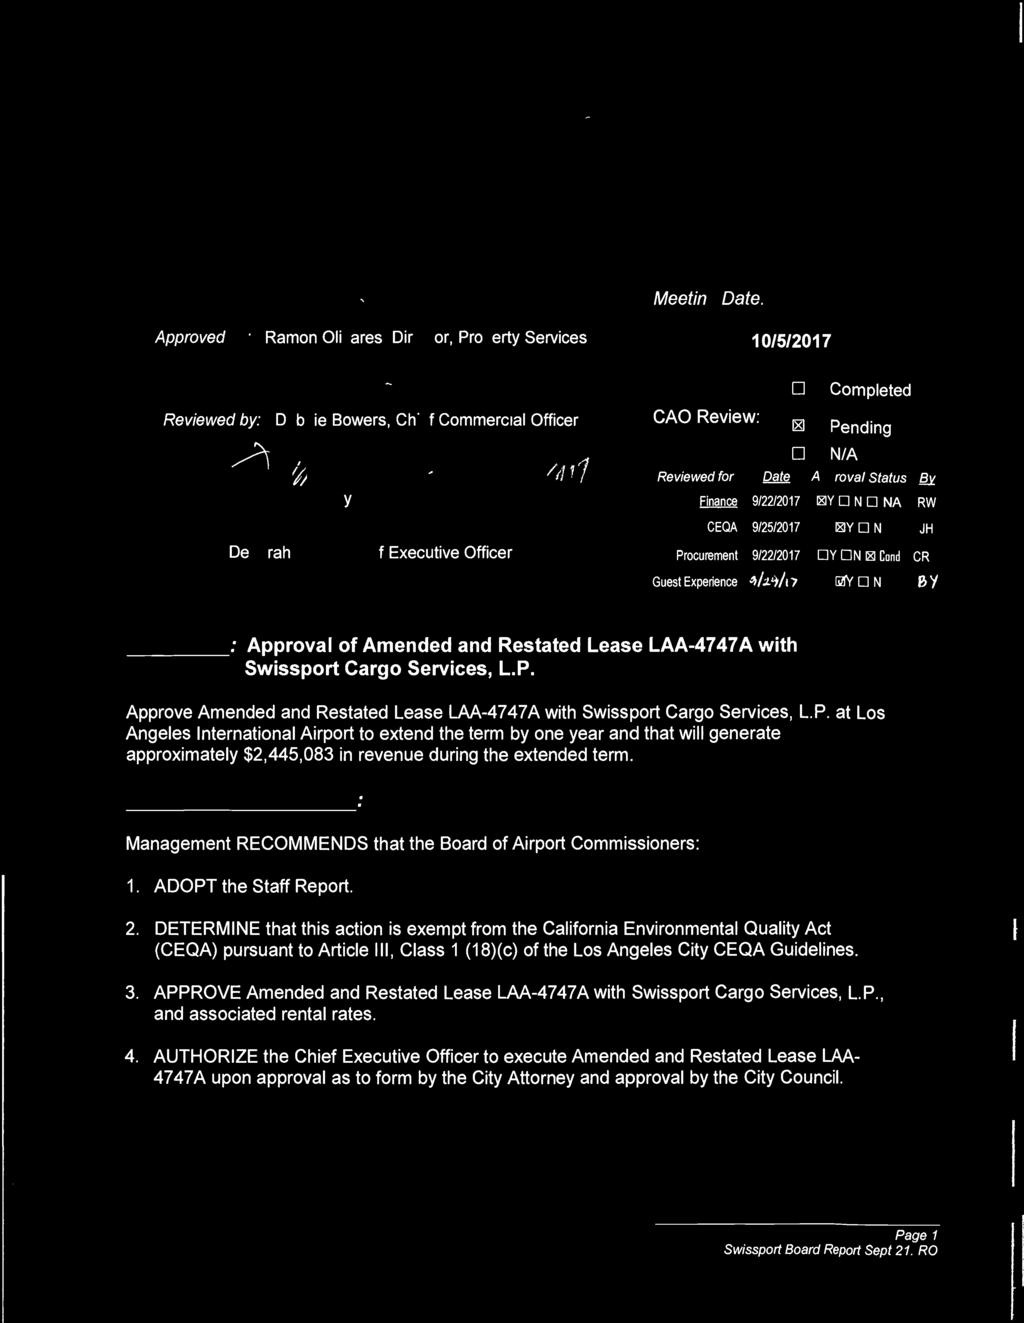 Approve Amended and Restated Lease LAA-4747A with Swissport Cargo Services, L.P.